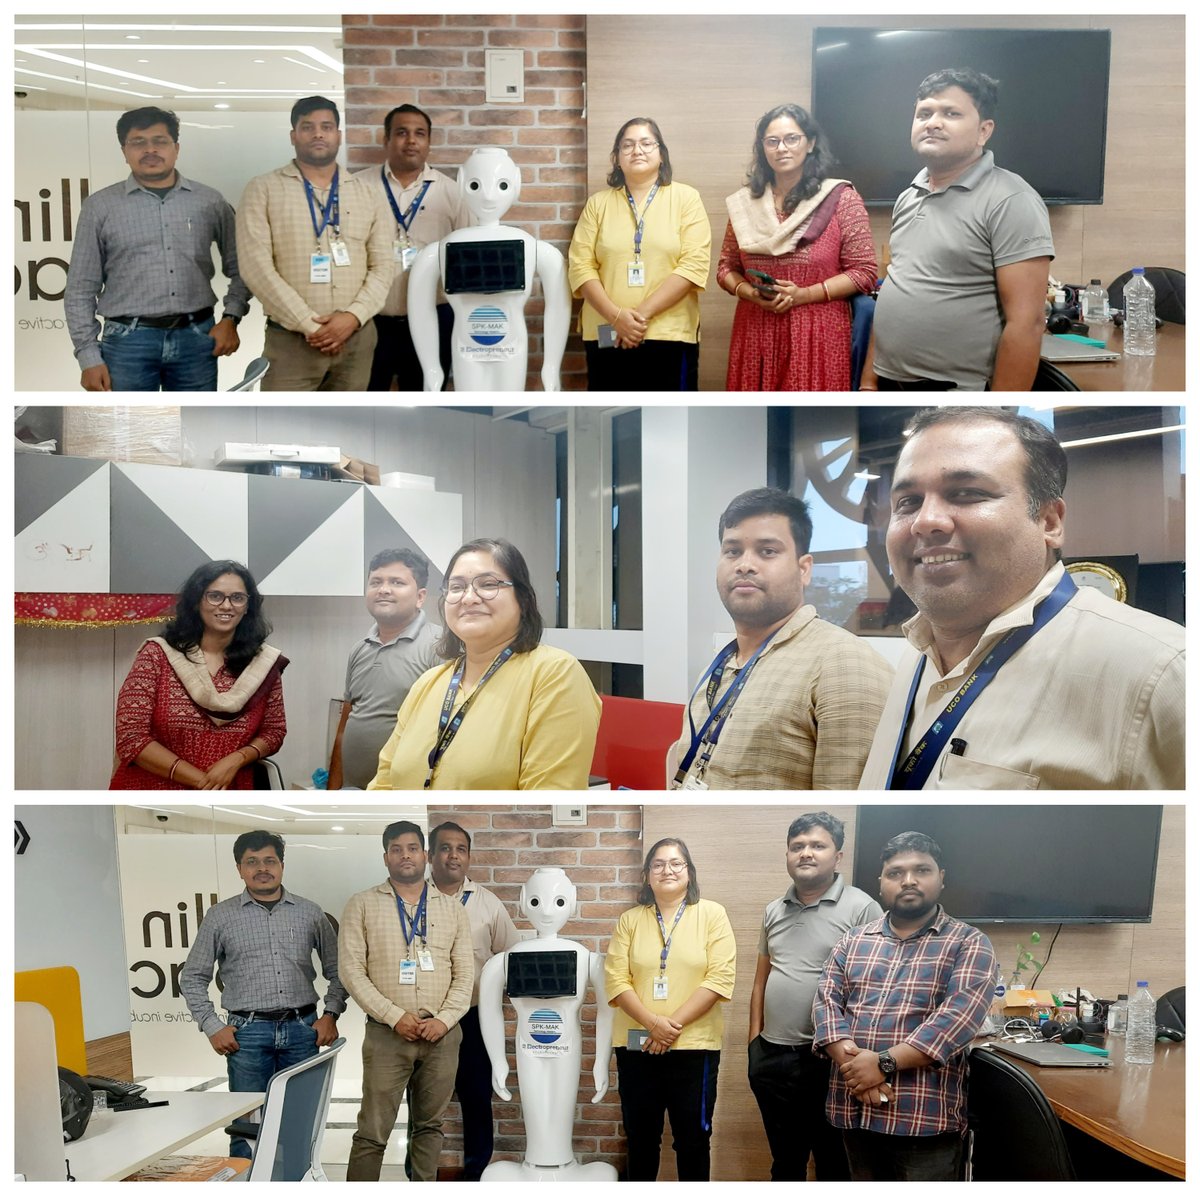 Ms. MITALI MADHUSMITA DAS, Chief Manager(CMO), @UCOBankCare with other officials visited @stpiepbbs and discussed on various financial schemes available for Startups. @GoI_MeitY @MSH_MeitY @Rajeev_GoI @arvindtw @DeveshTyagii @s_subodh @SuryaPattanayak @manas_r_panda